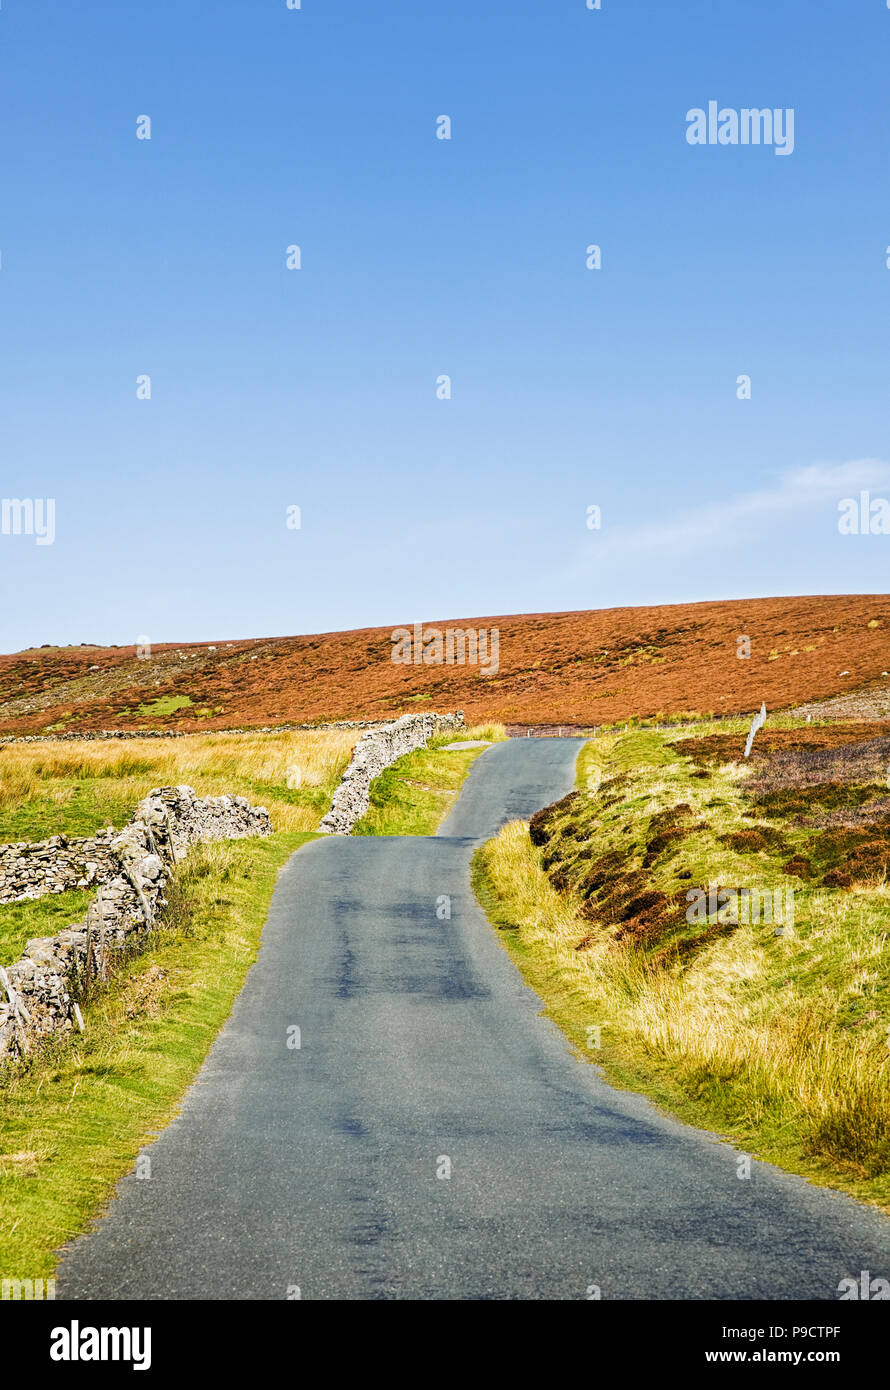 Small tarmac country road in the Yorkshire Dales National Park, England, UK Stock Photo